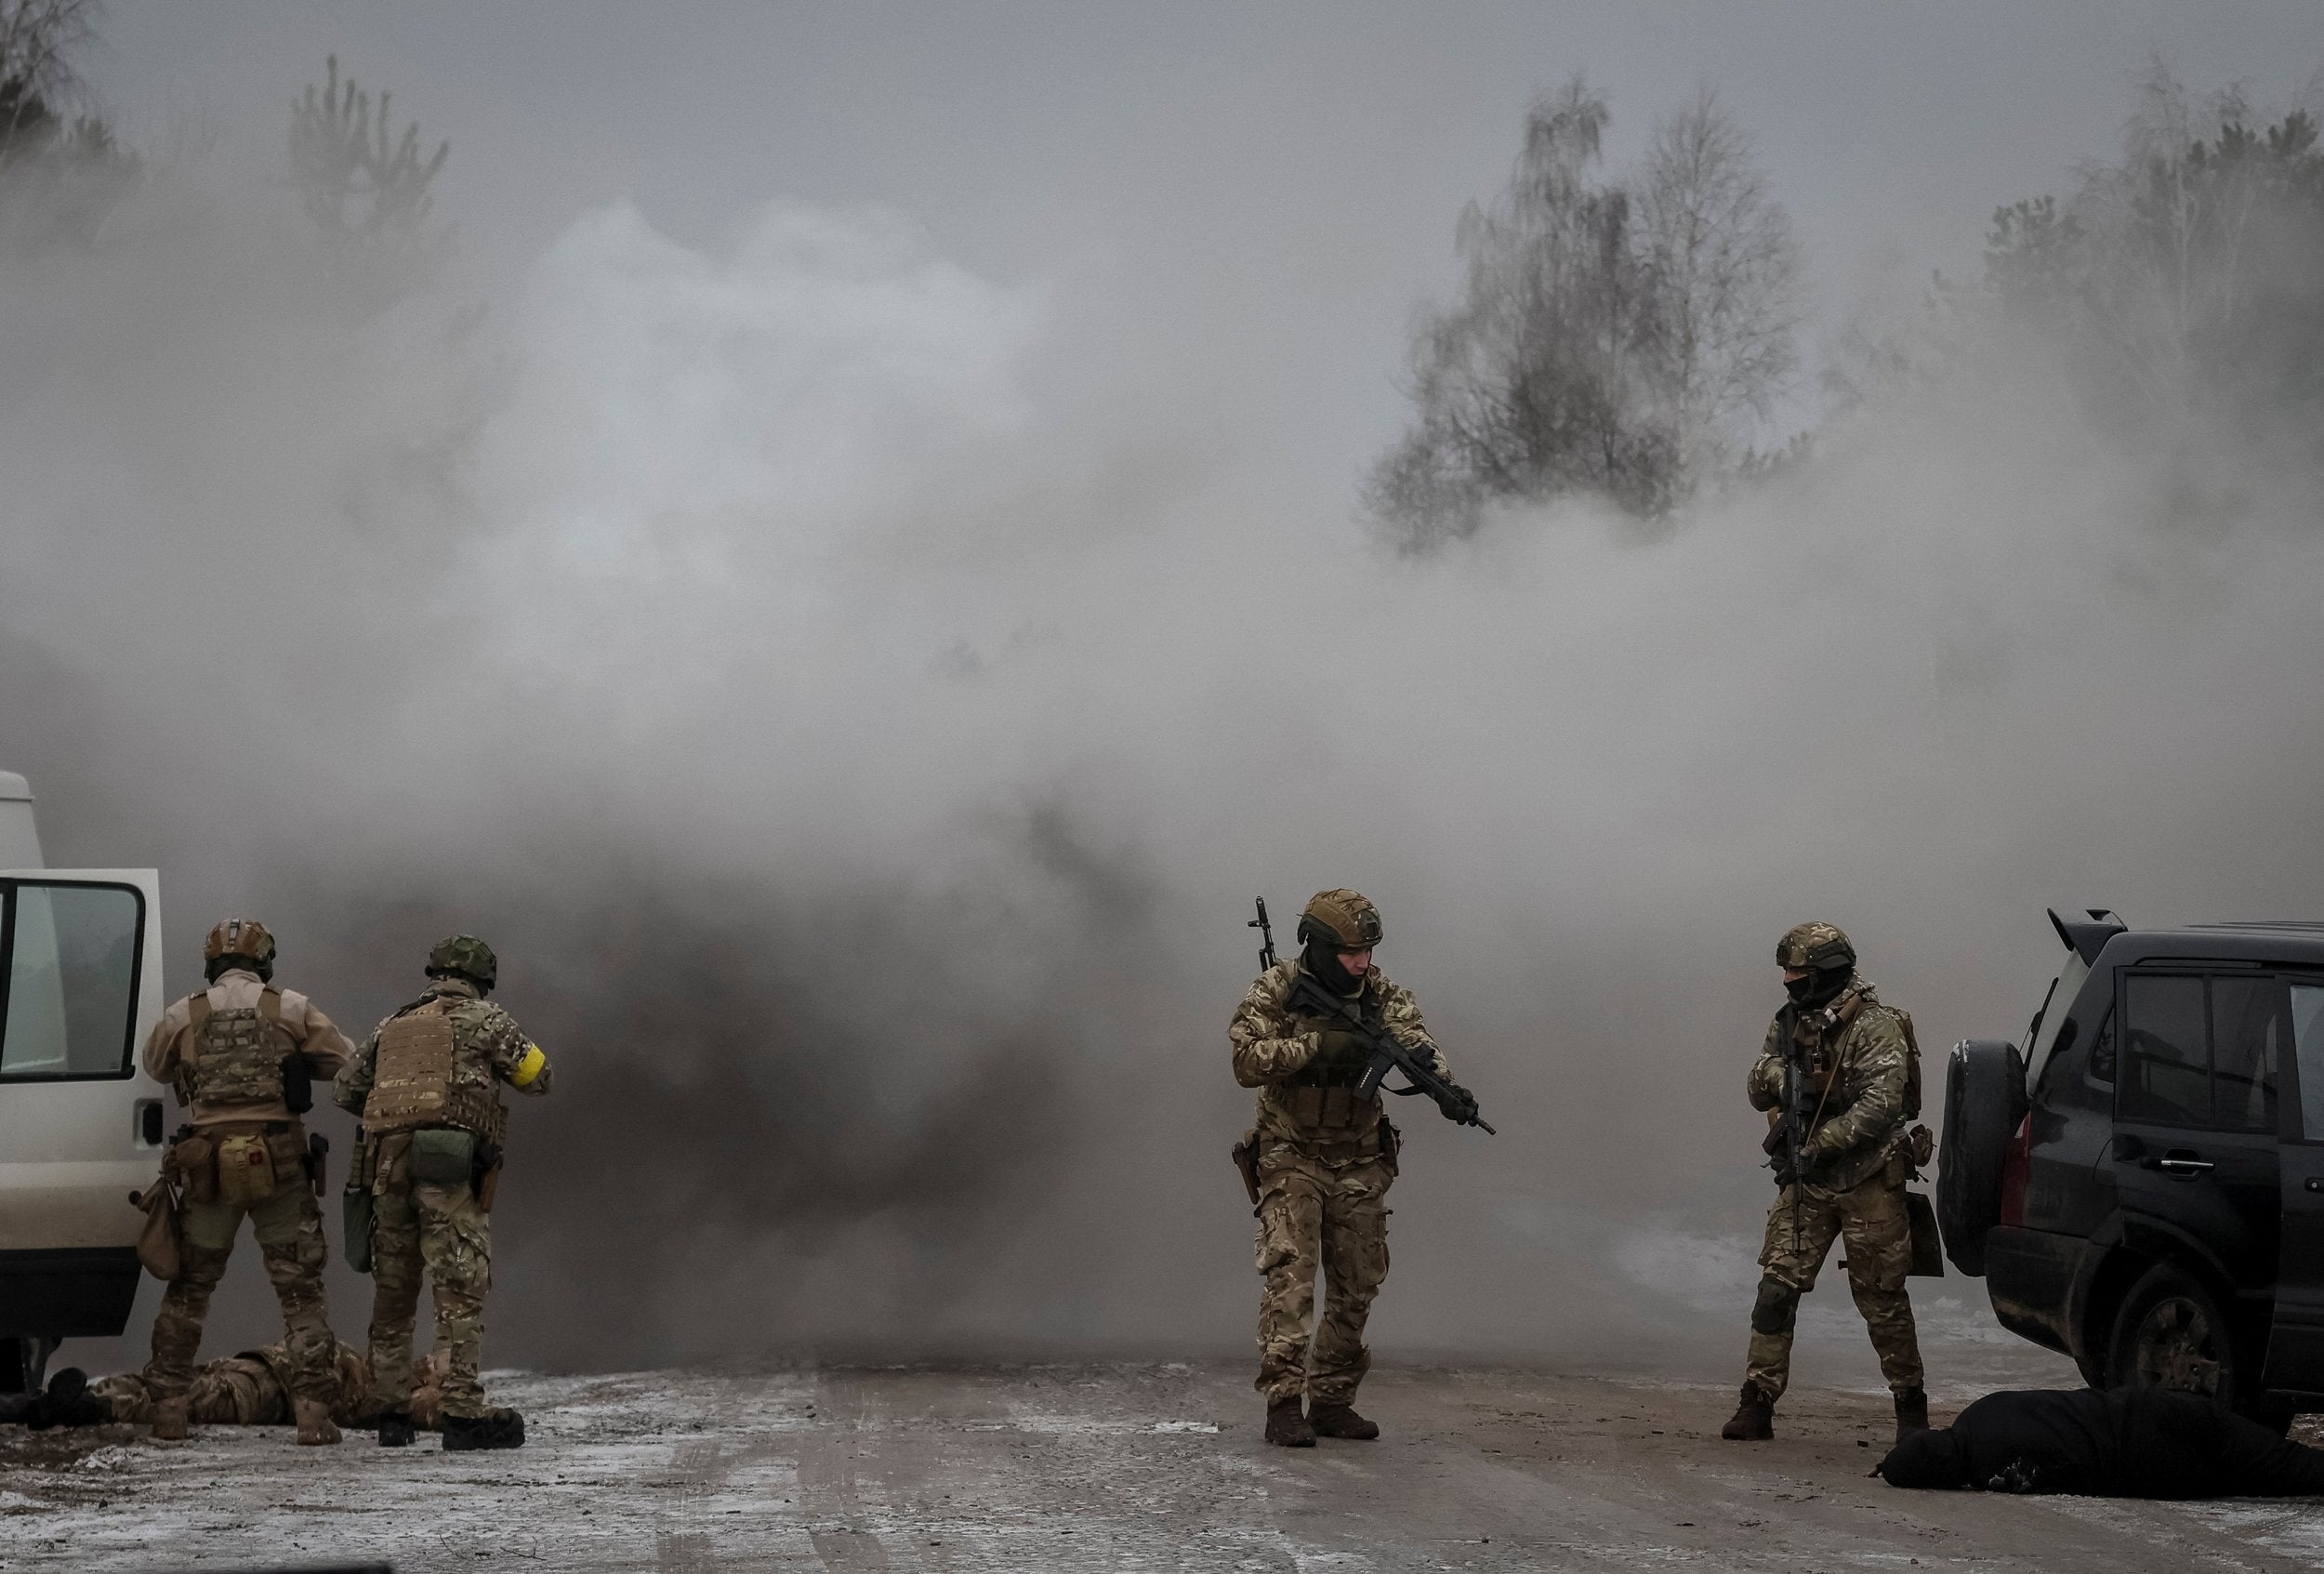 Ukraine stages drills near Belarus amid fears of Russian assault